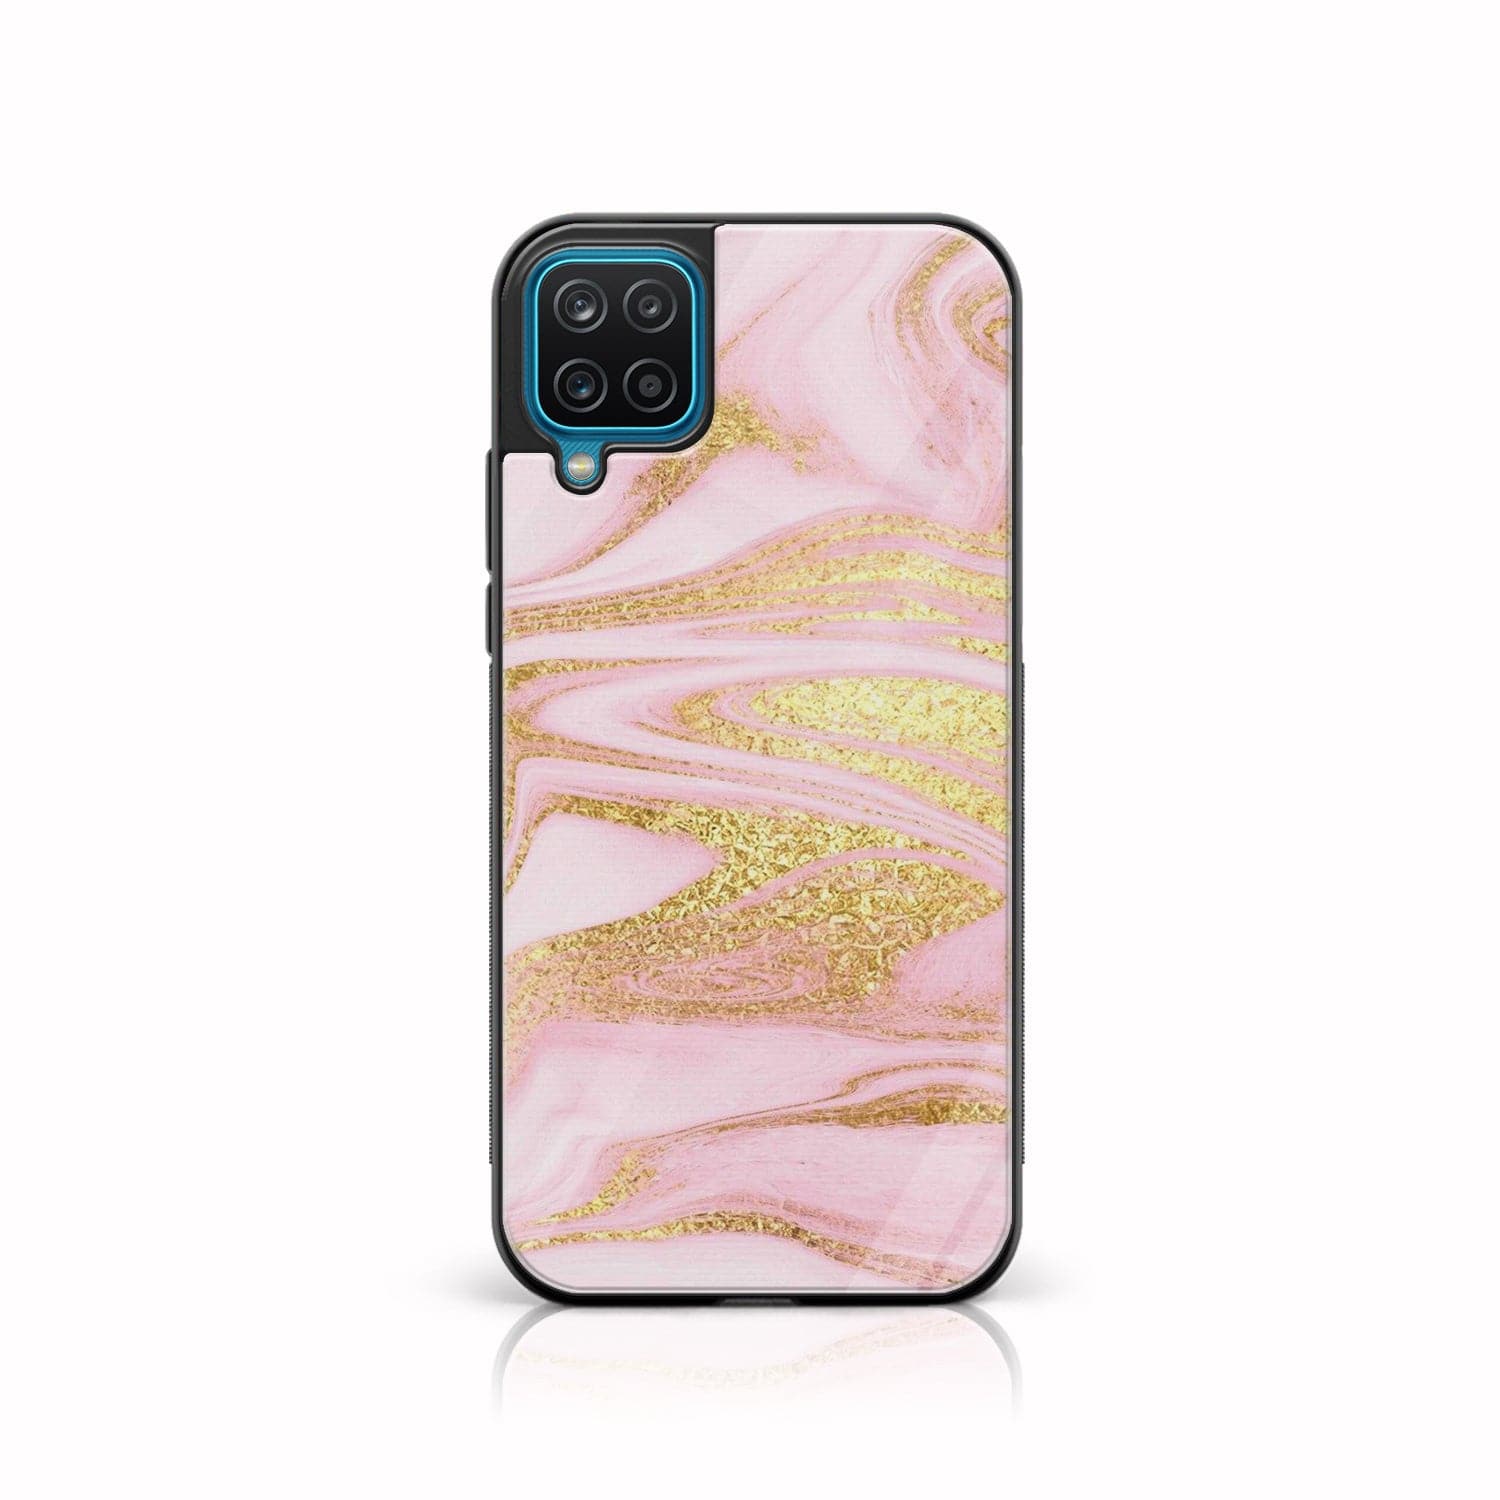 Samsung Galaxy A42 5G - Pink Marble Series - Premium Printed Glass soft Bumper shock Proof Case